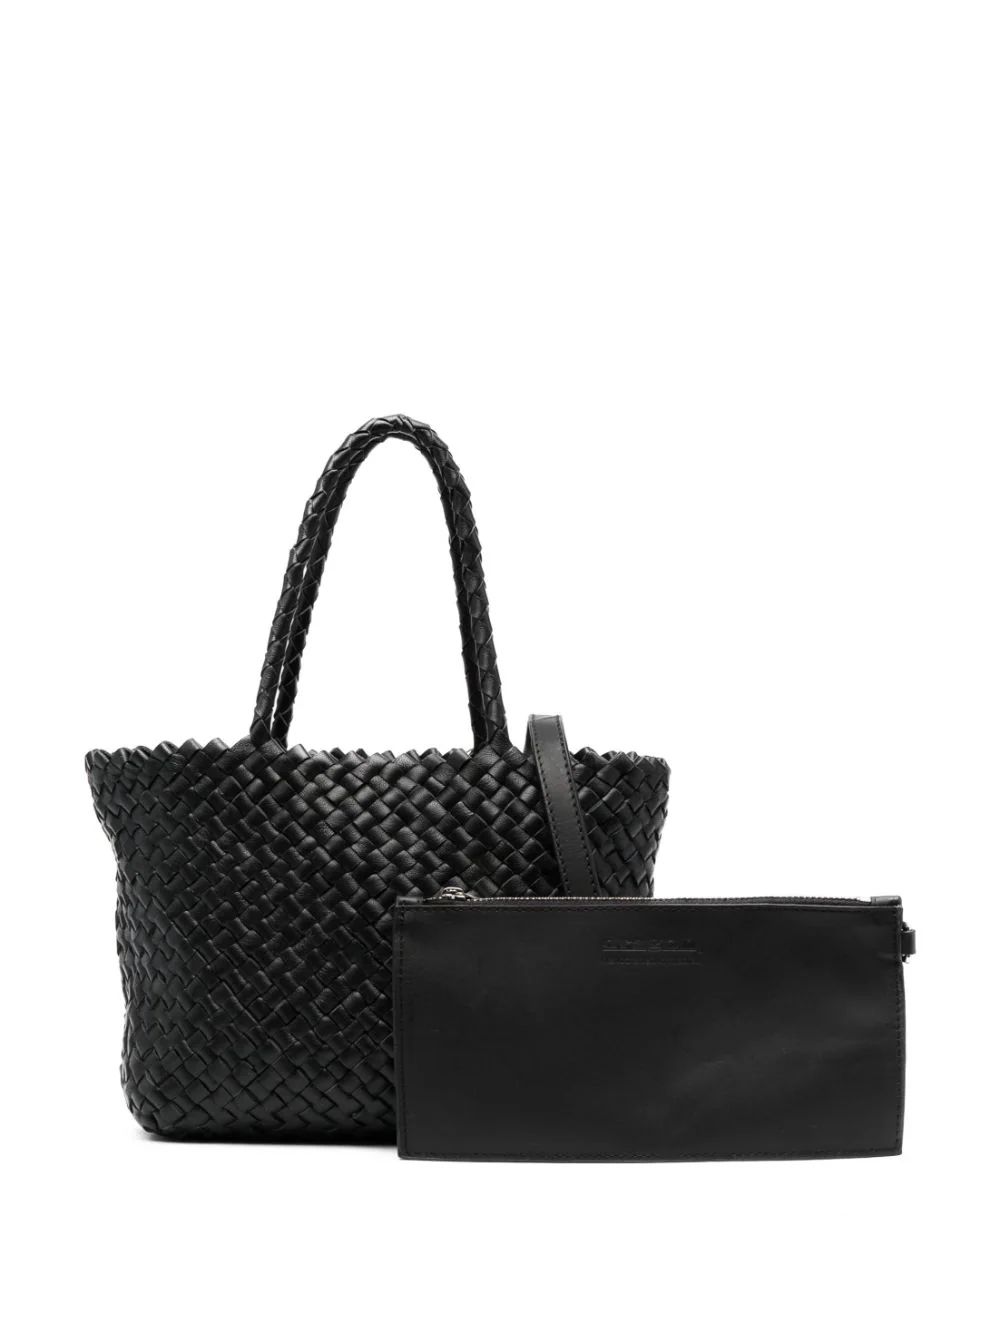 woven leather tote bag | Farfetch Global